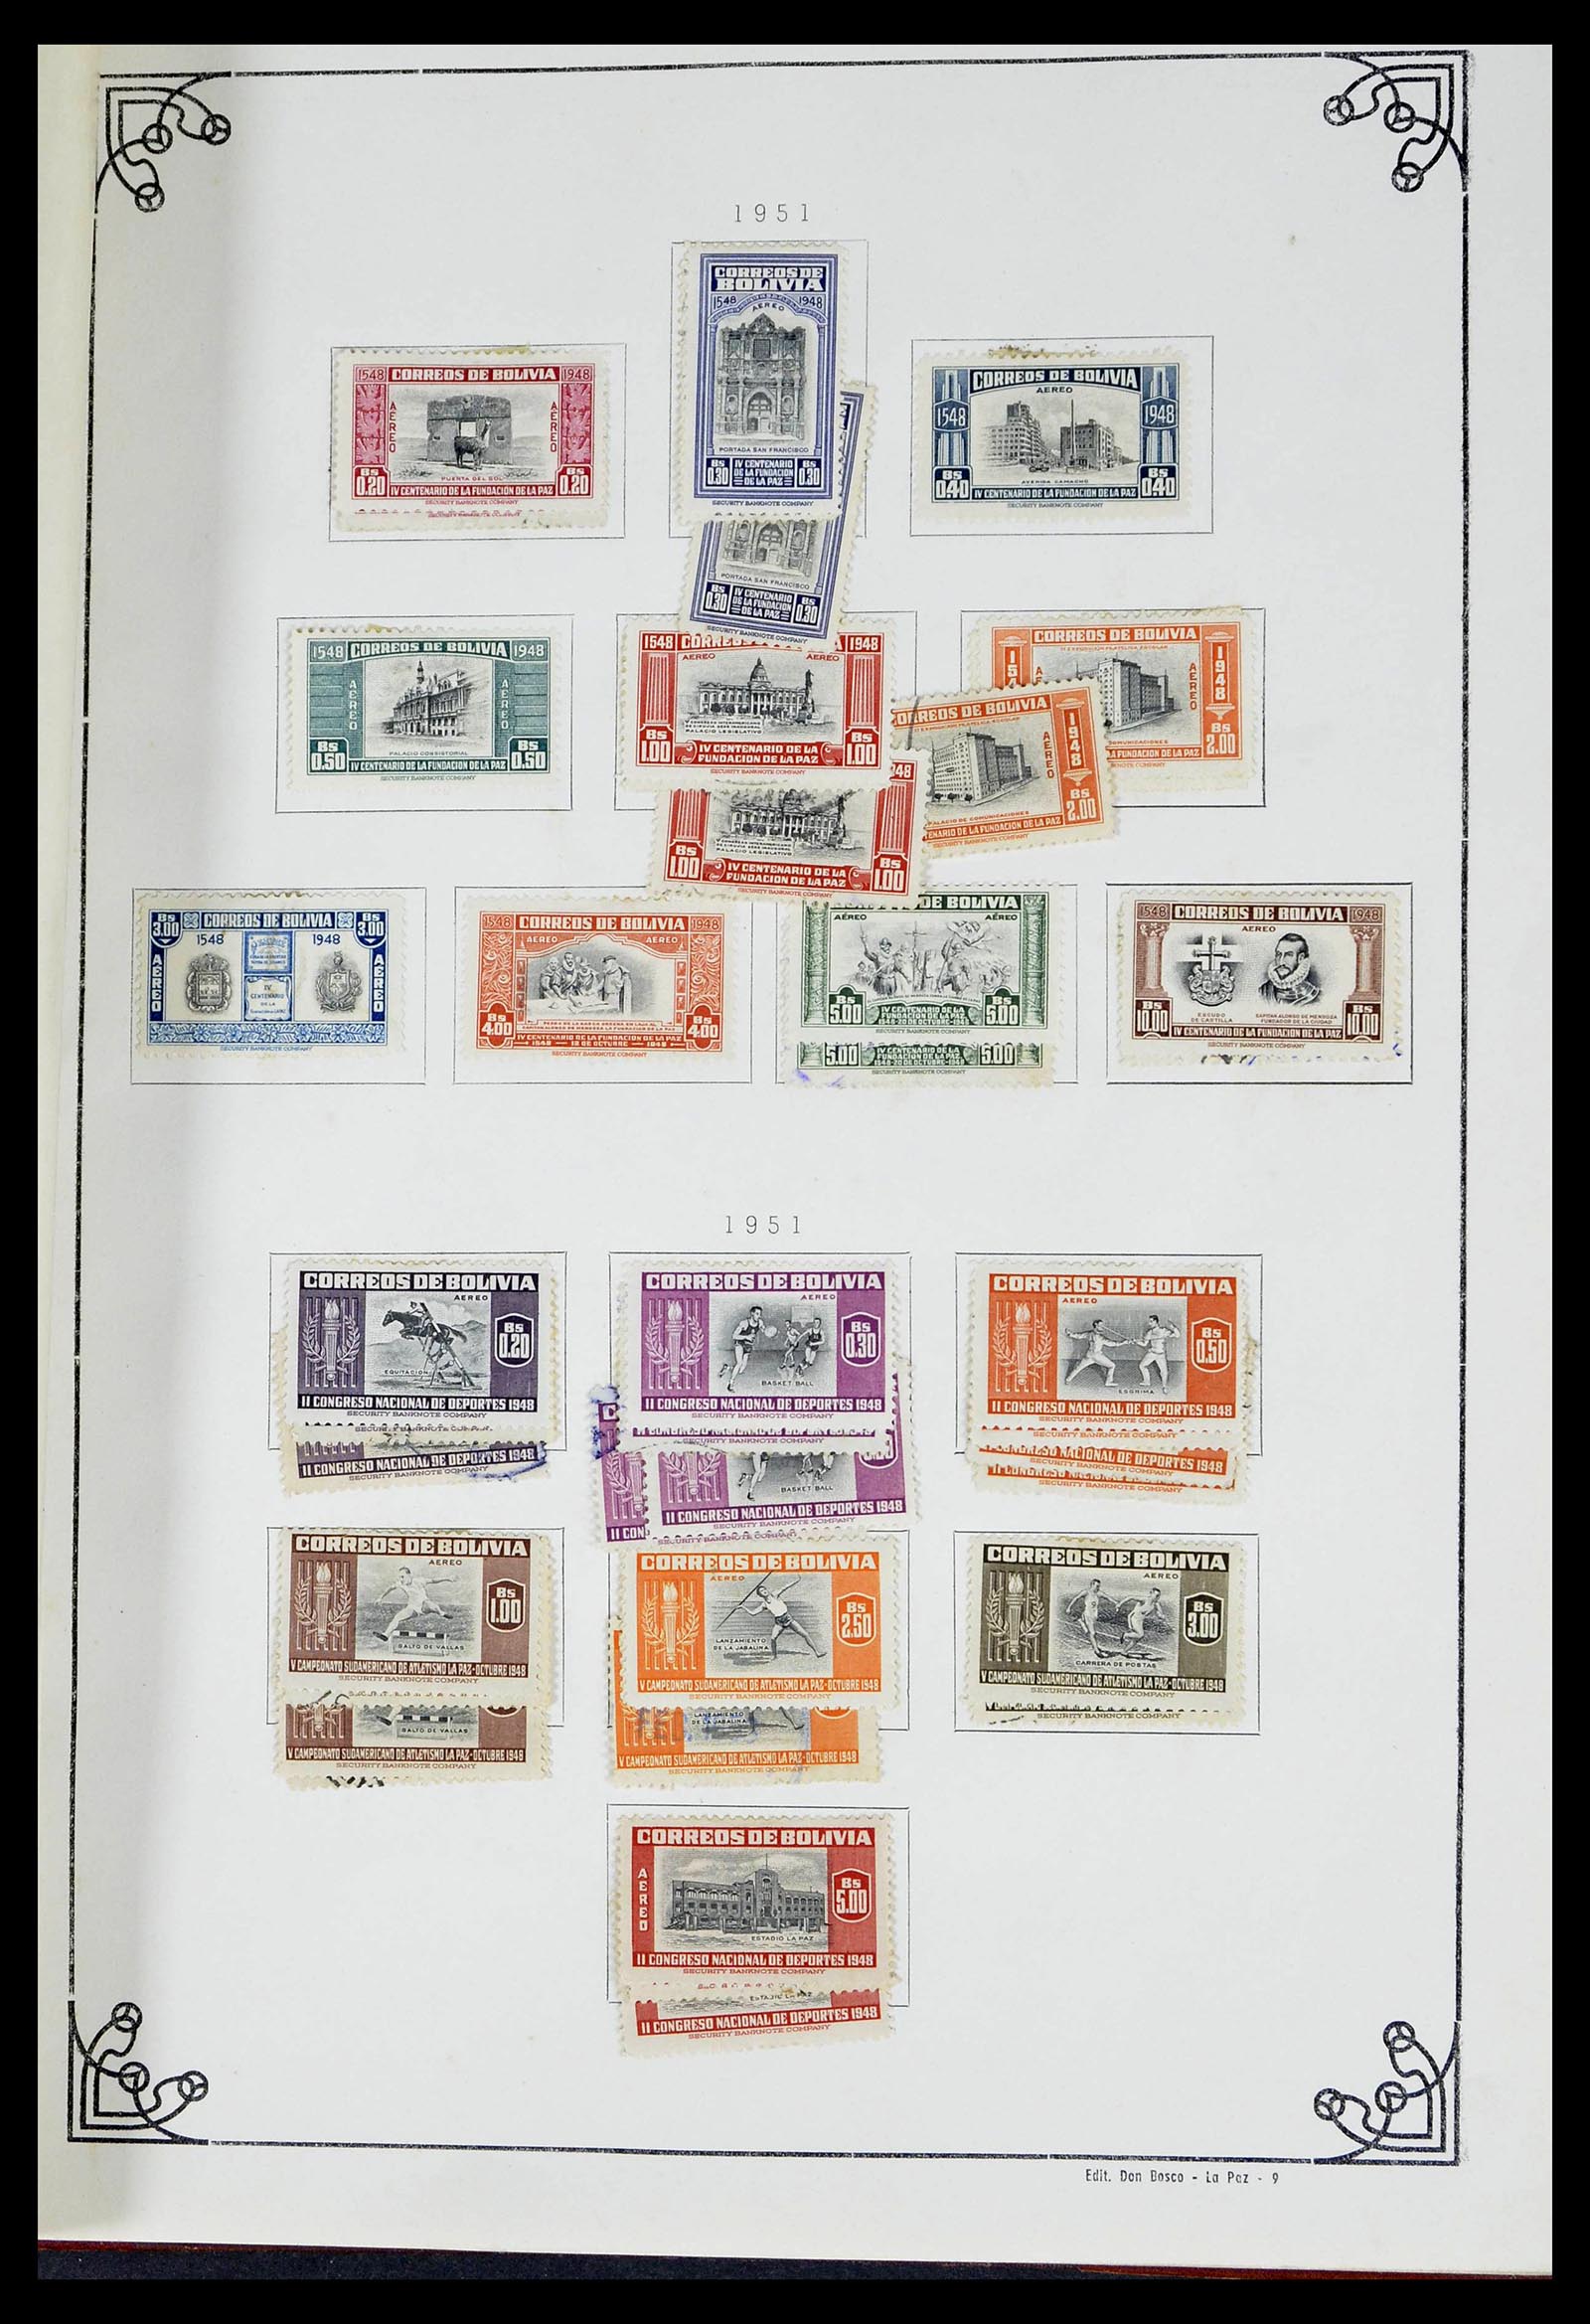 39224 0054 - Stamp collection 39224 Bolivia 1849-1955.